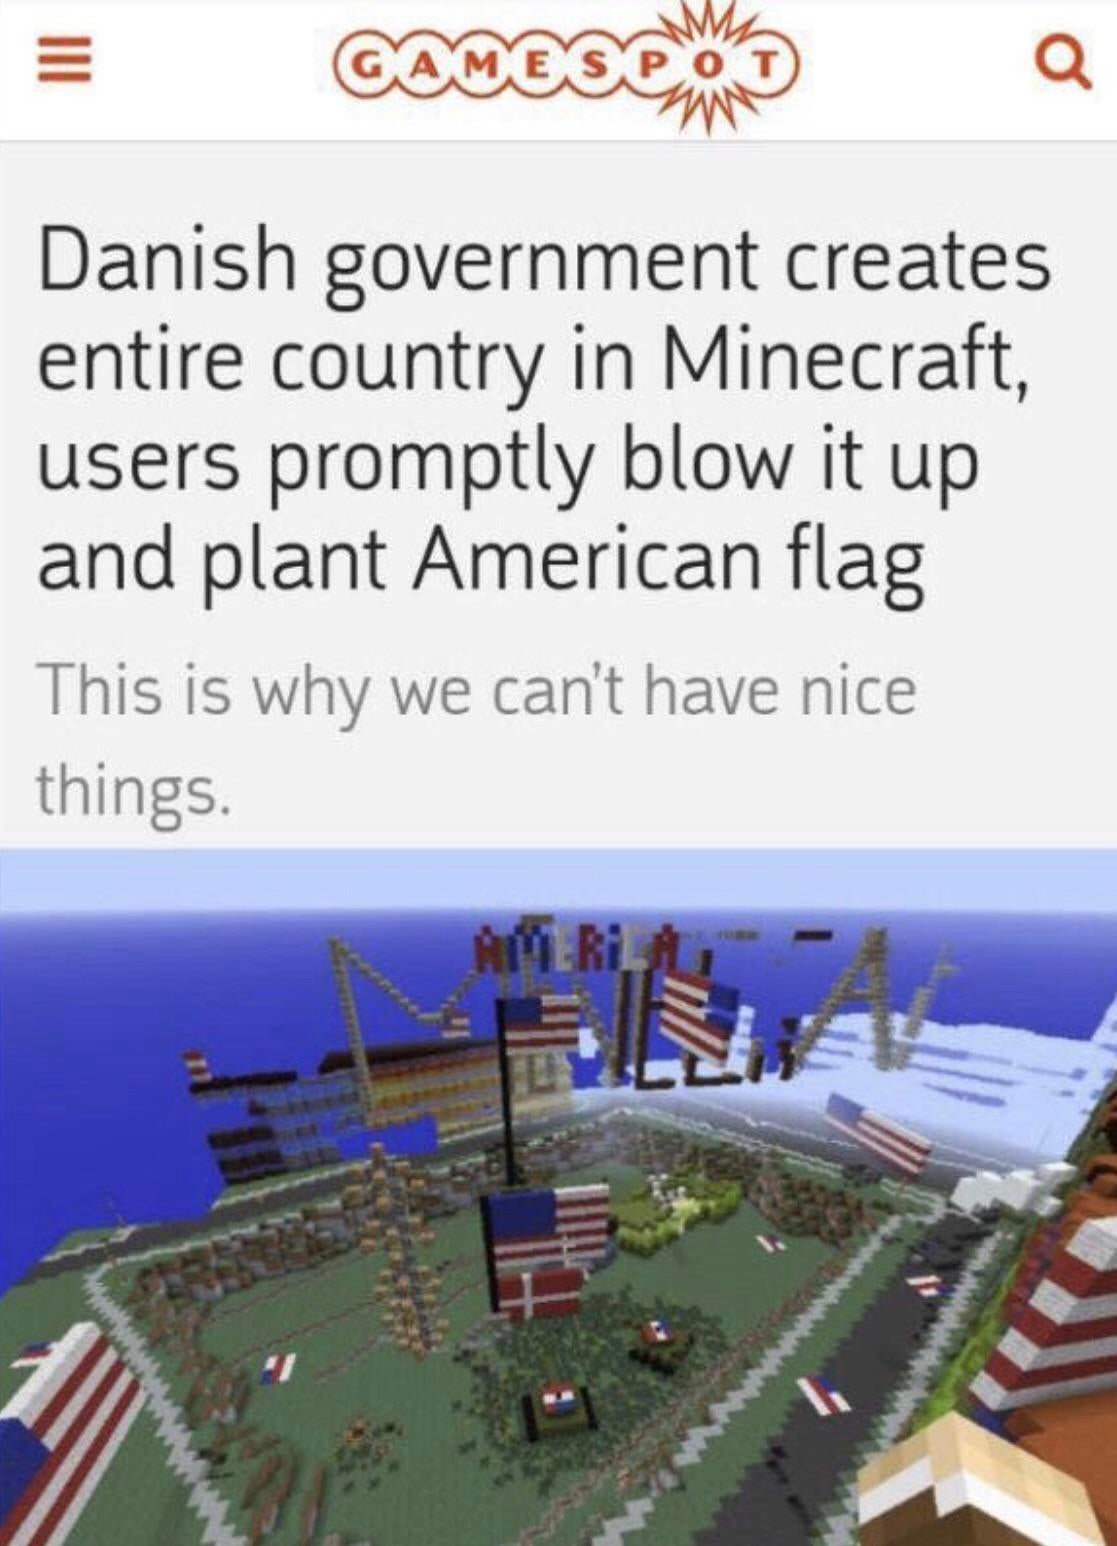 minecraft denmark destroyed - W Danish government creates entire country in Minecraft, users promptly blow it up and plant American flag This is why we can't have nice things.